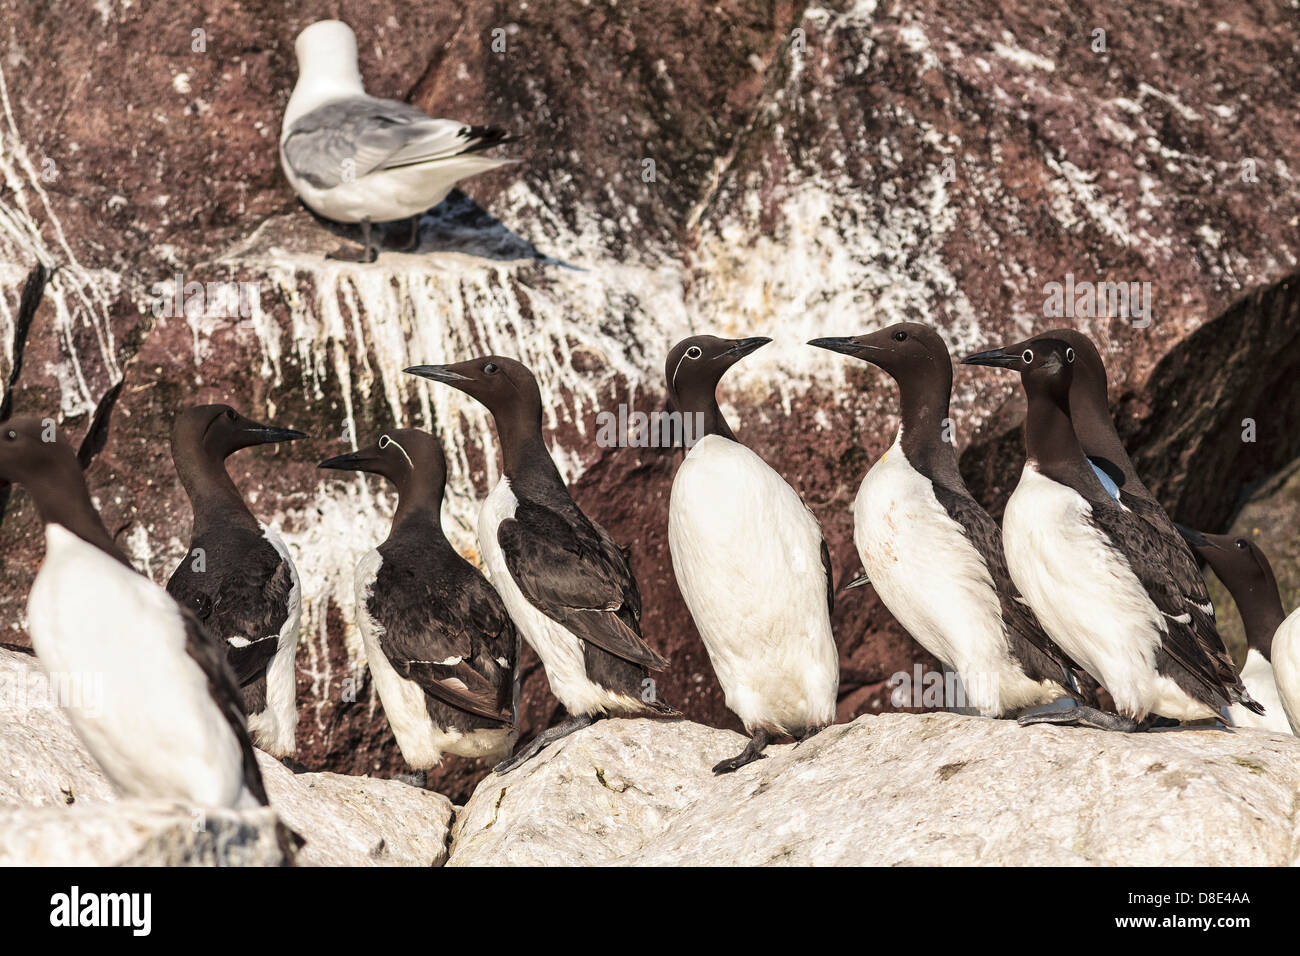 Common Murres or Gillemots on a Cliff Stock Photo